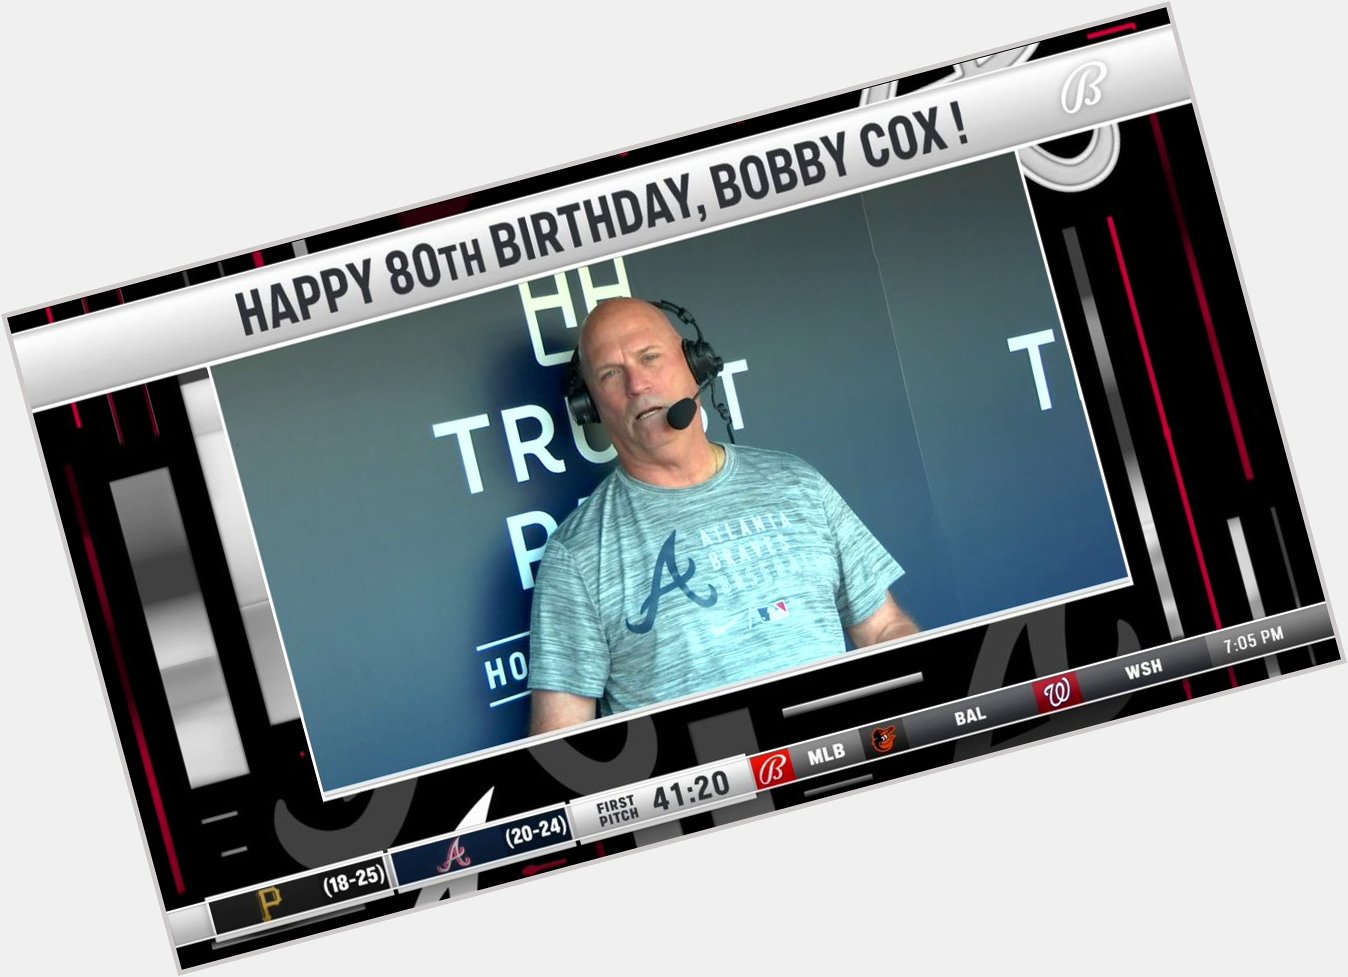 \"Wish you could be out here.\"

Brian Snitker sends Bobby Cox a heartfelt happy birthday message. 